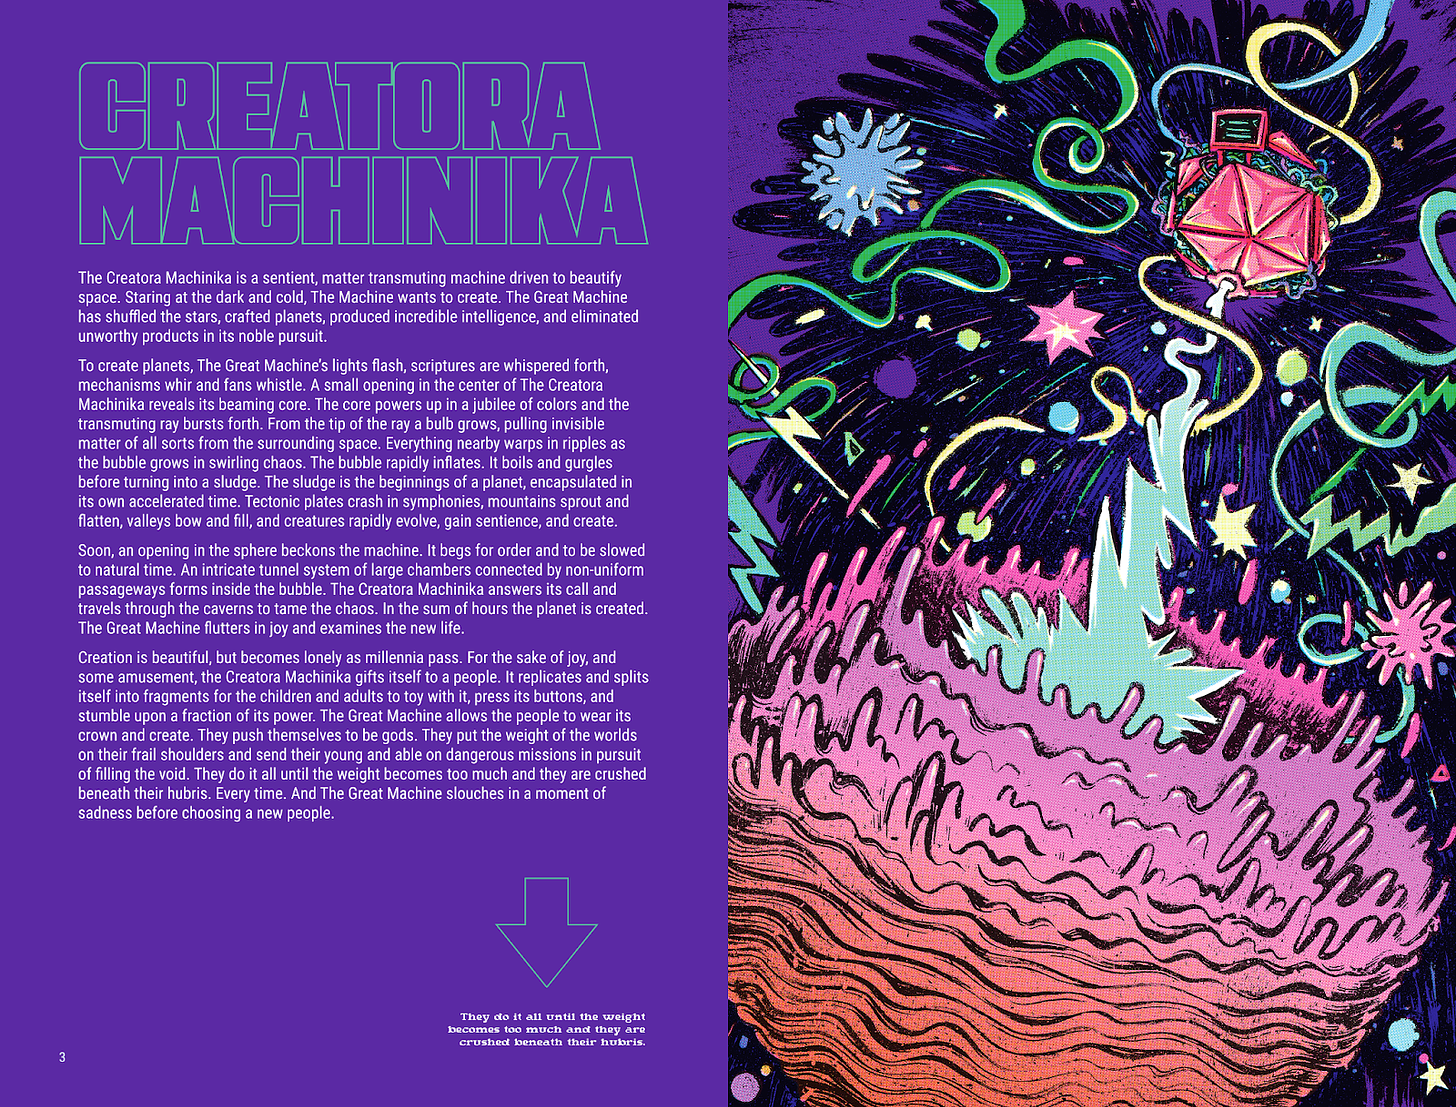 Creatora Machinika spread. Psychedelic space art of the Creatora Machinika, a giant robotic-like structure, building a planet out of wavy space energy.